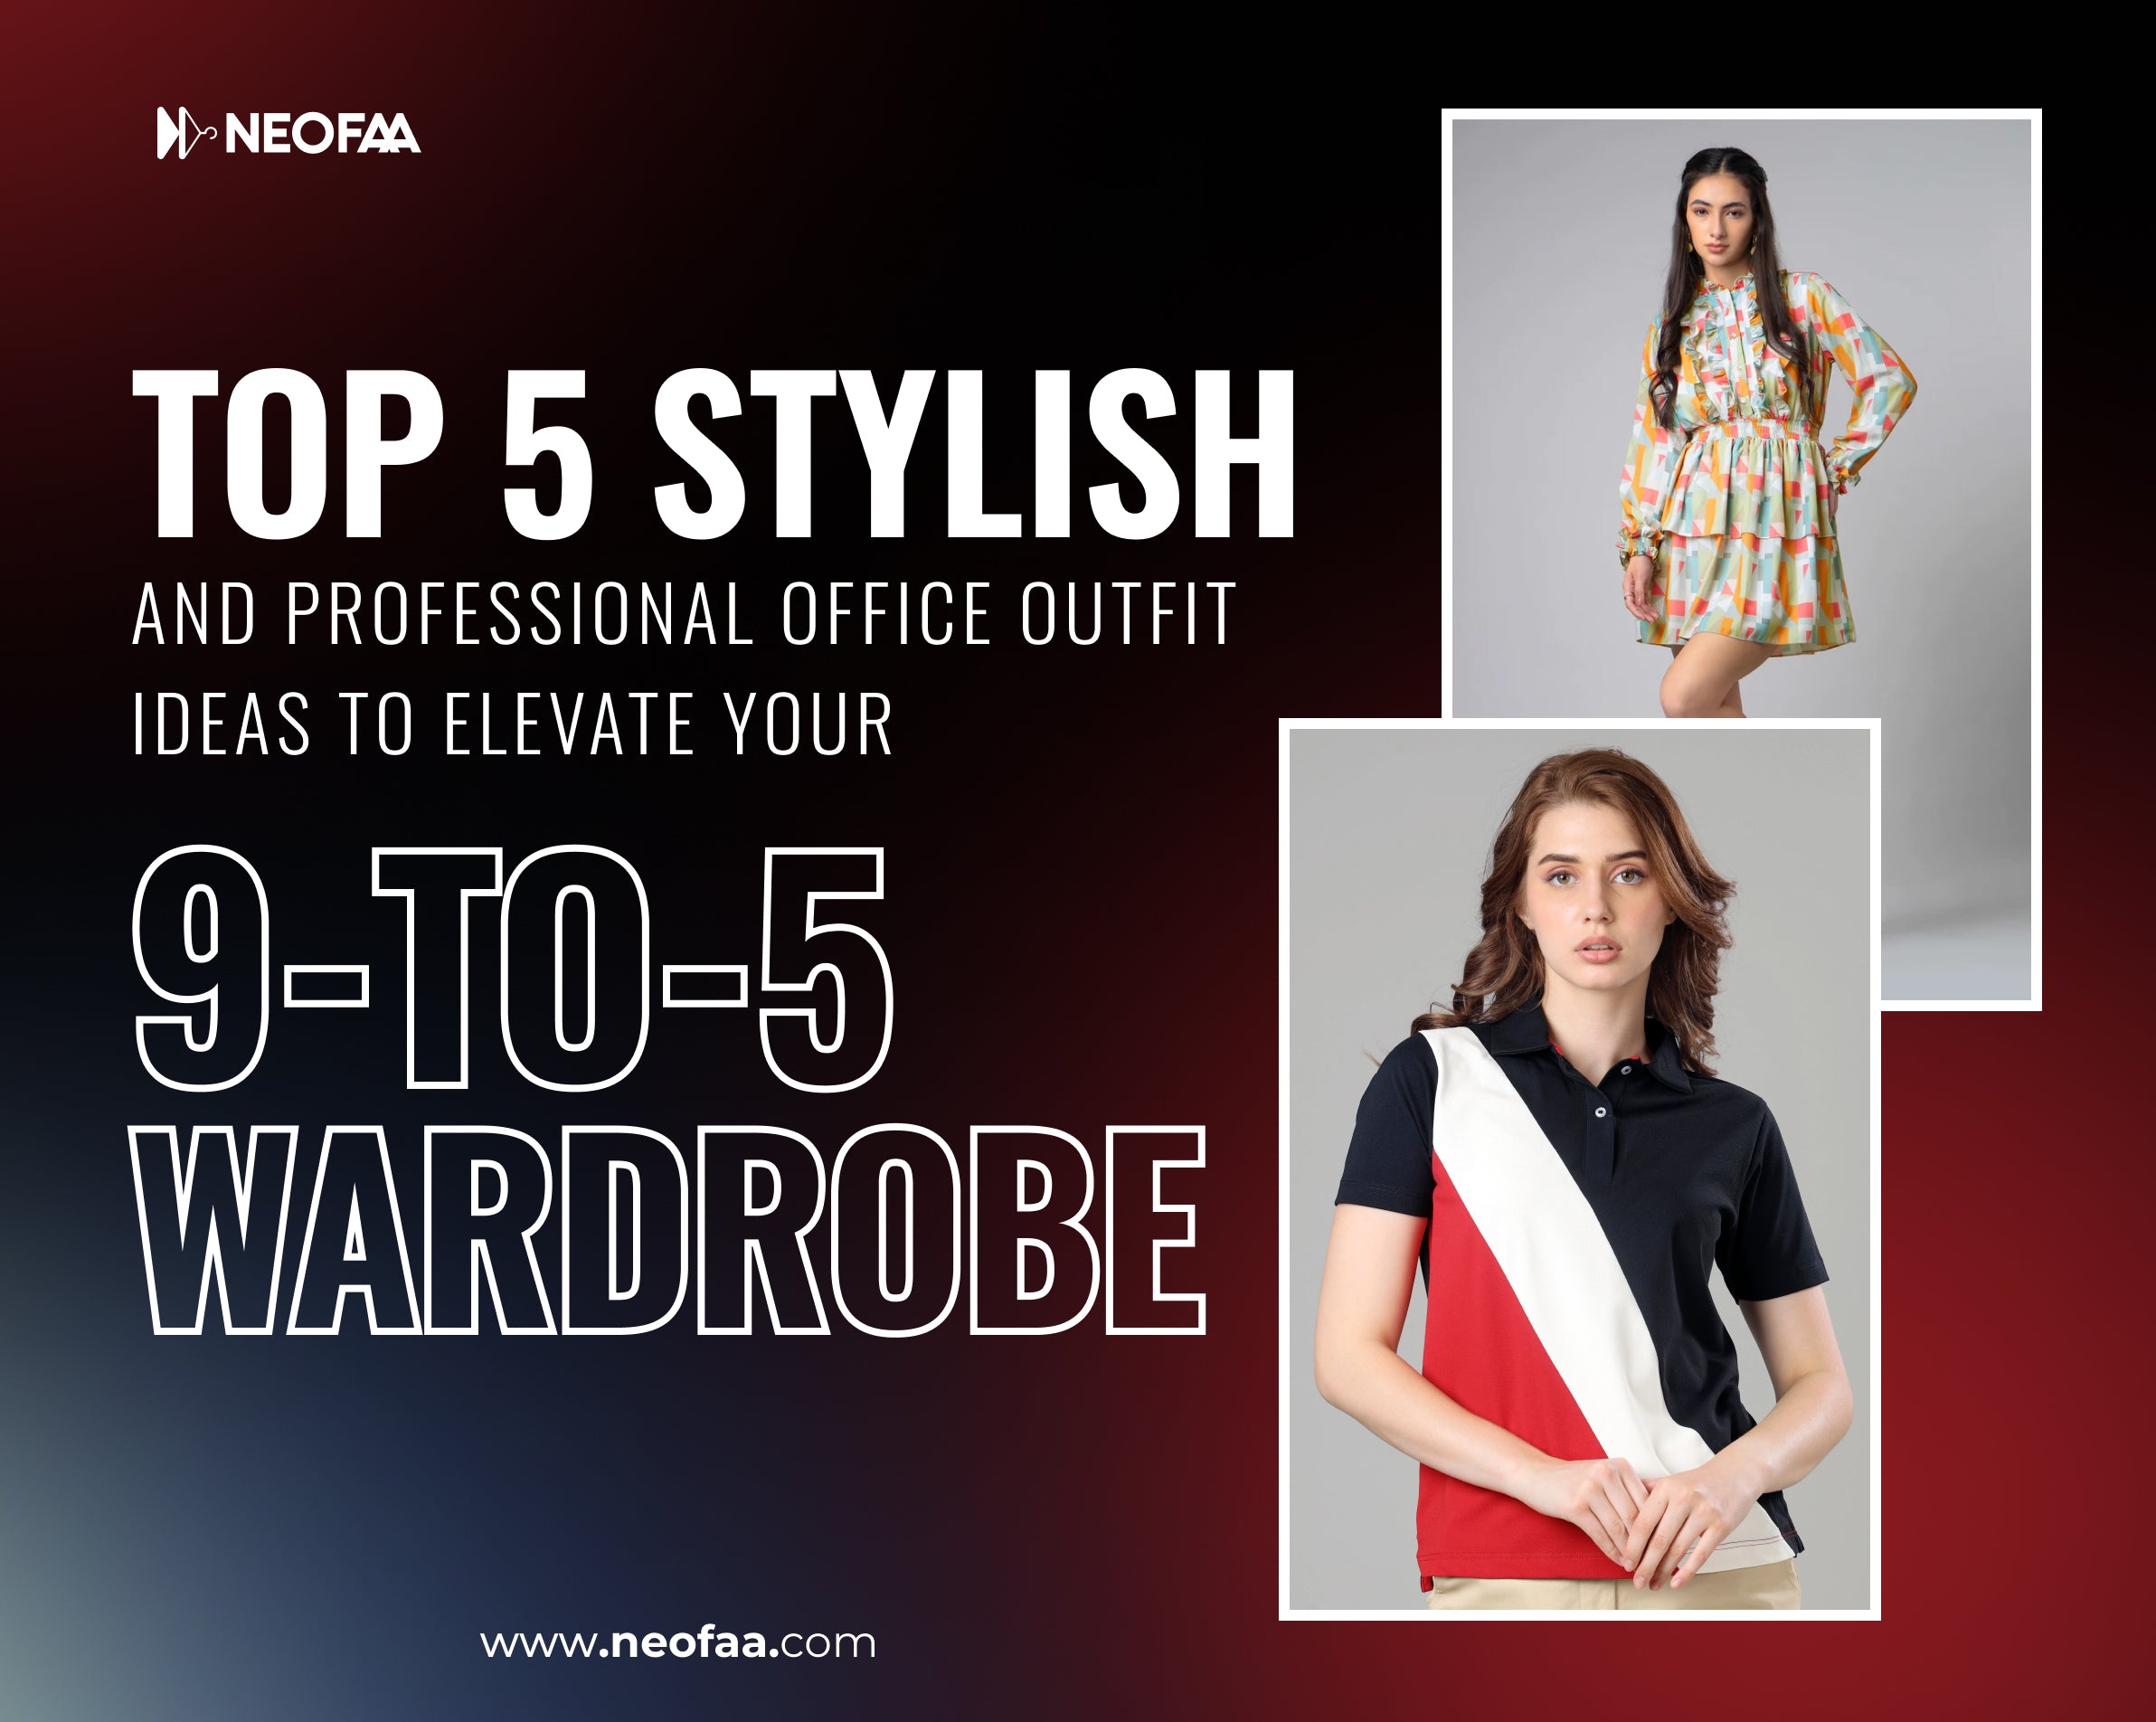 Top 5 Stylish and Professional Office Outfit Ideas to Elevate Your 9-to-5 Wardrobe